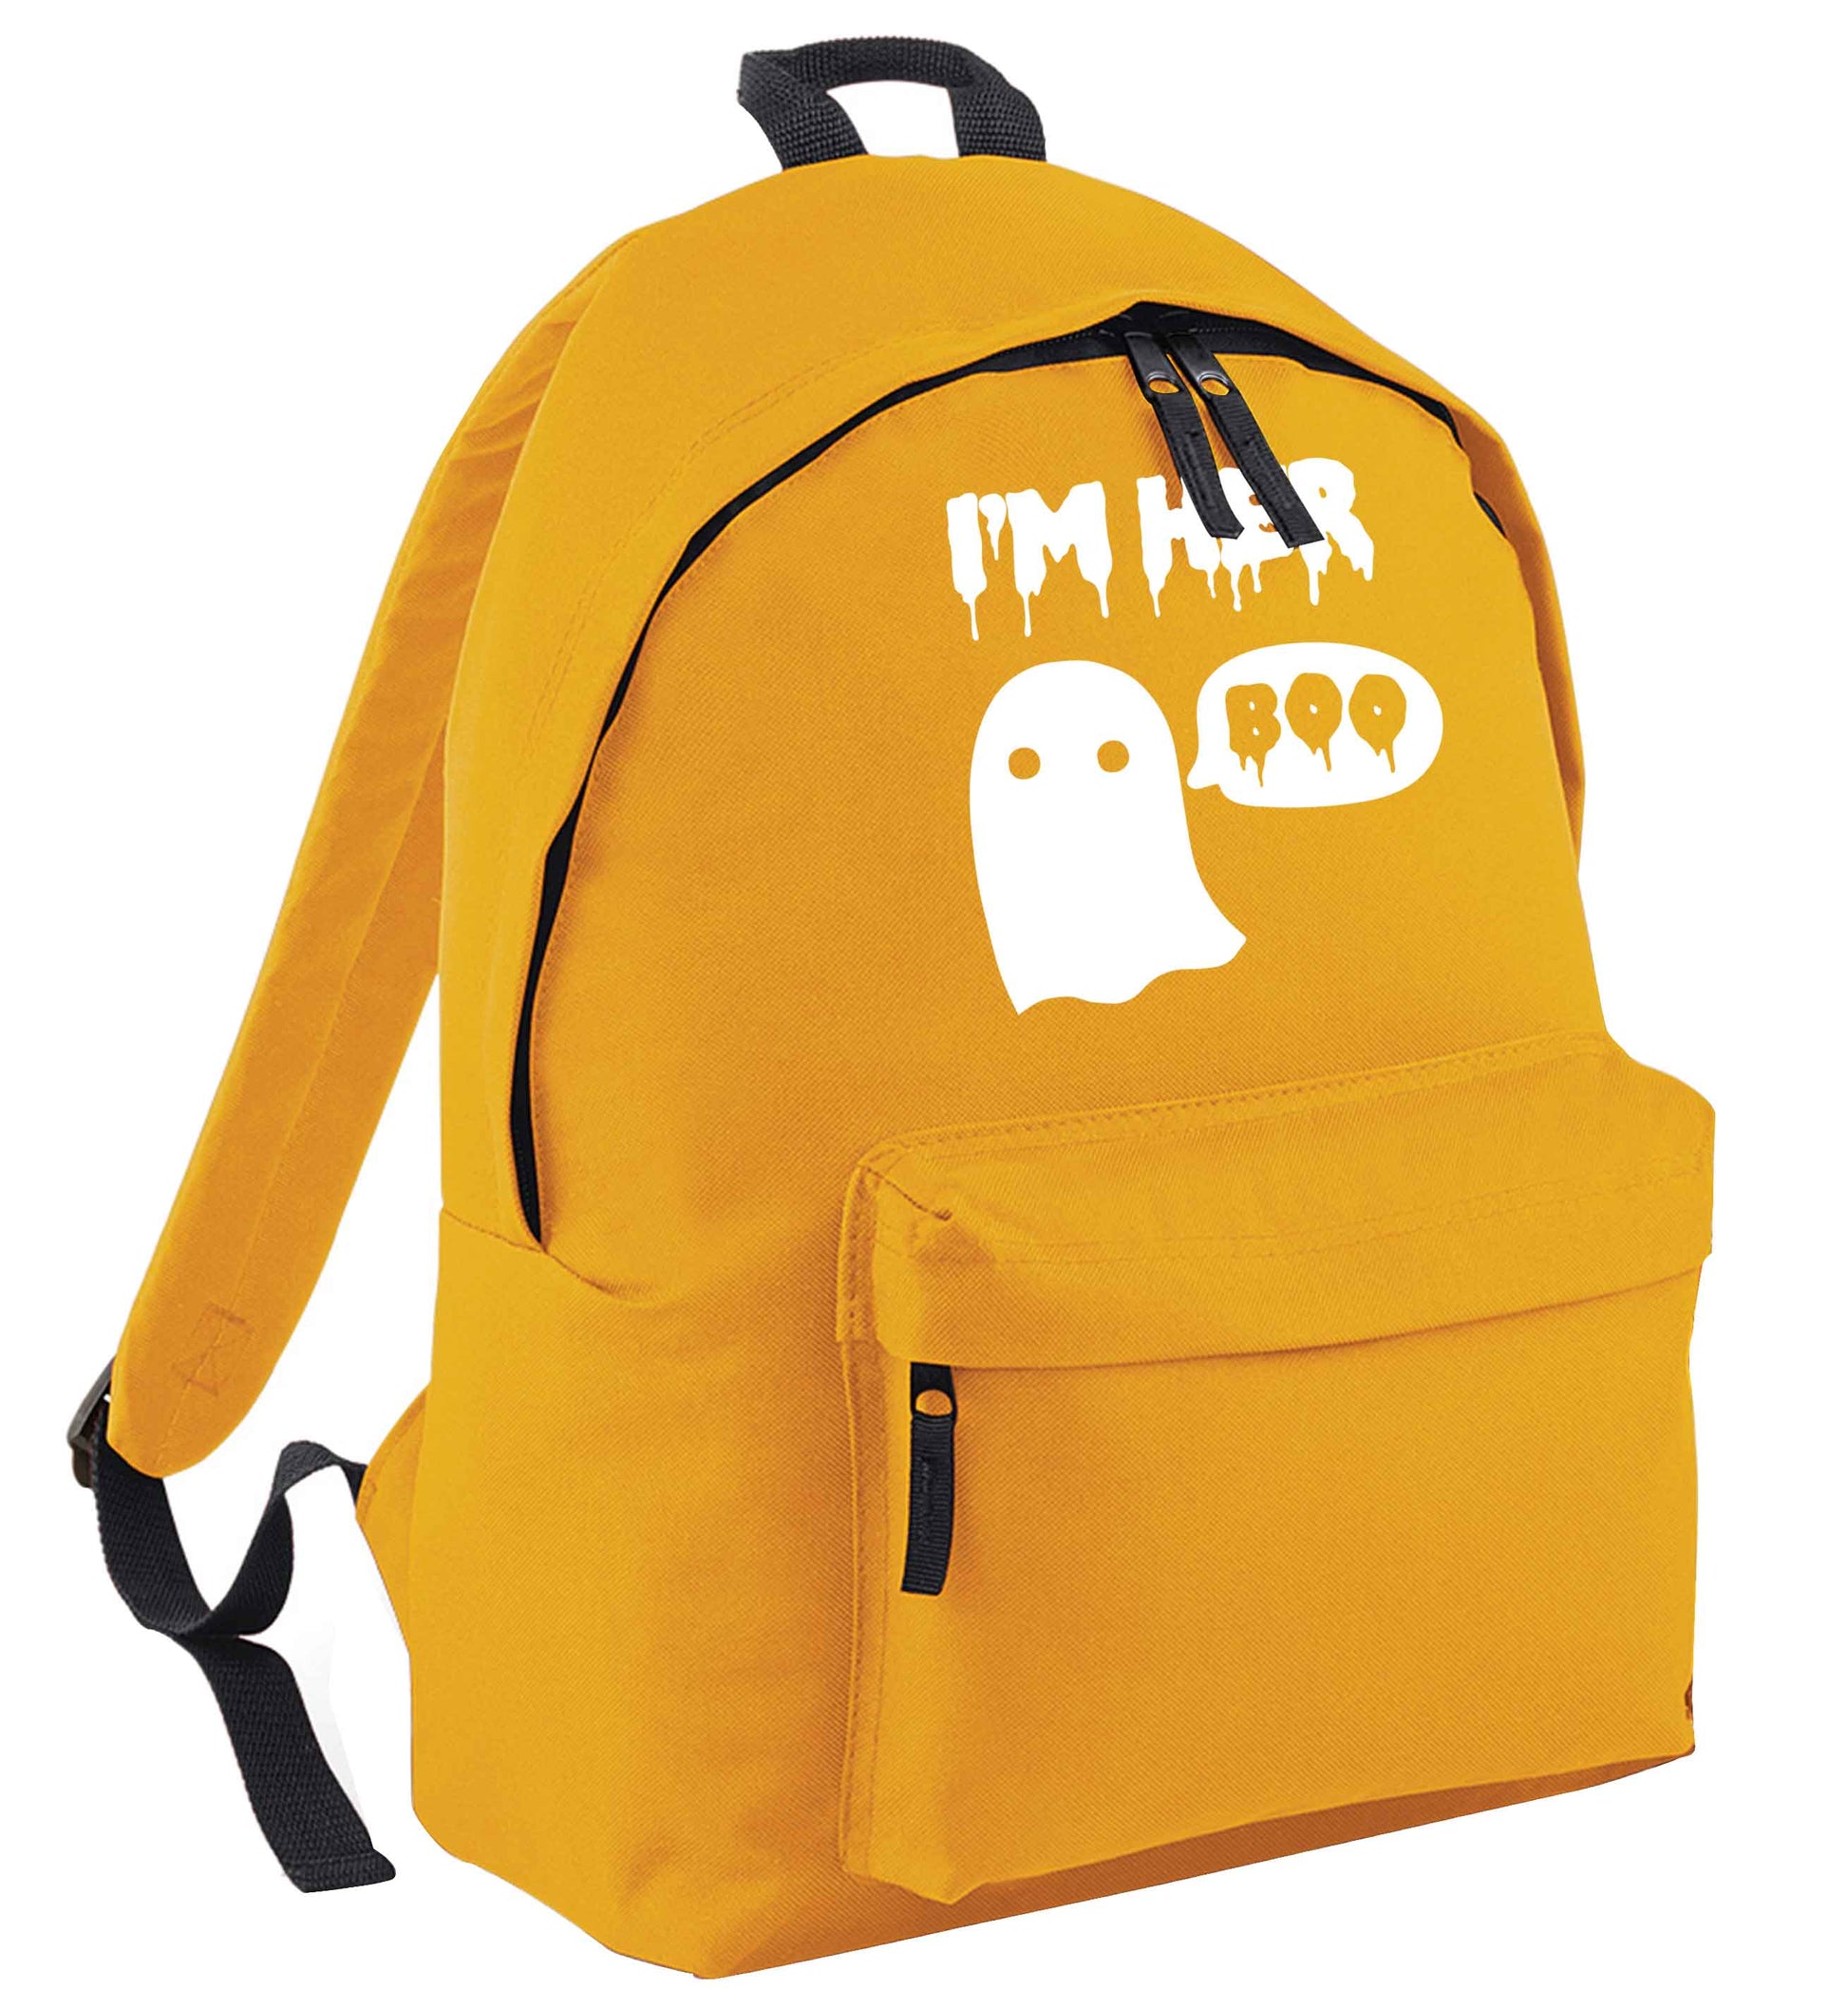 I'm her boo mustard adults backpack